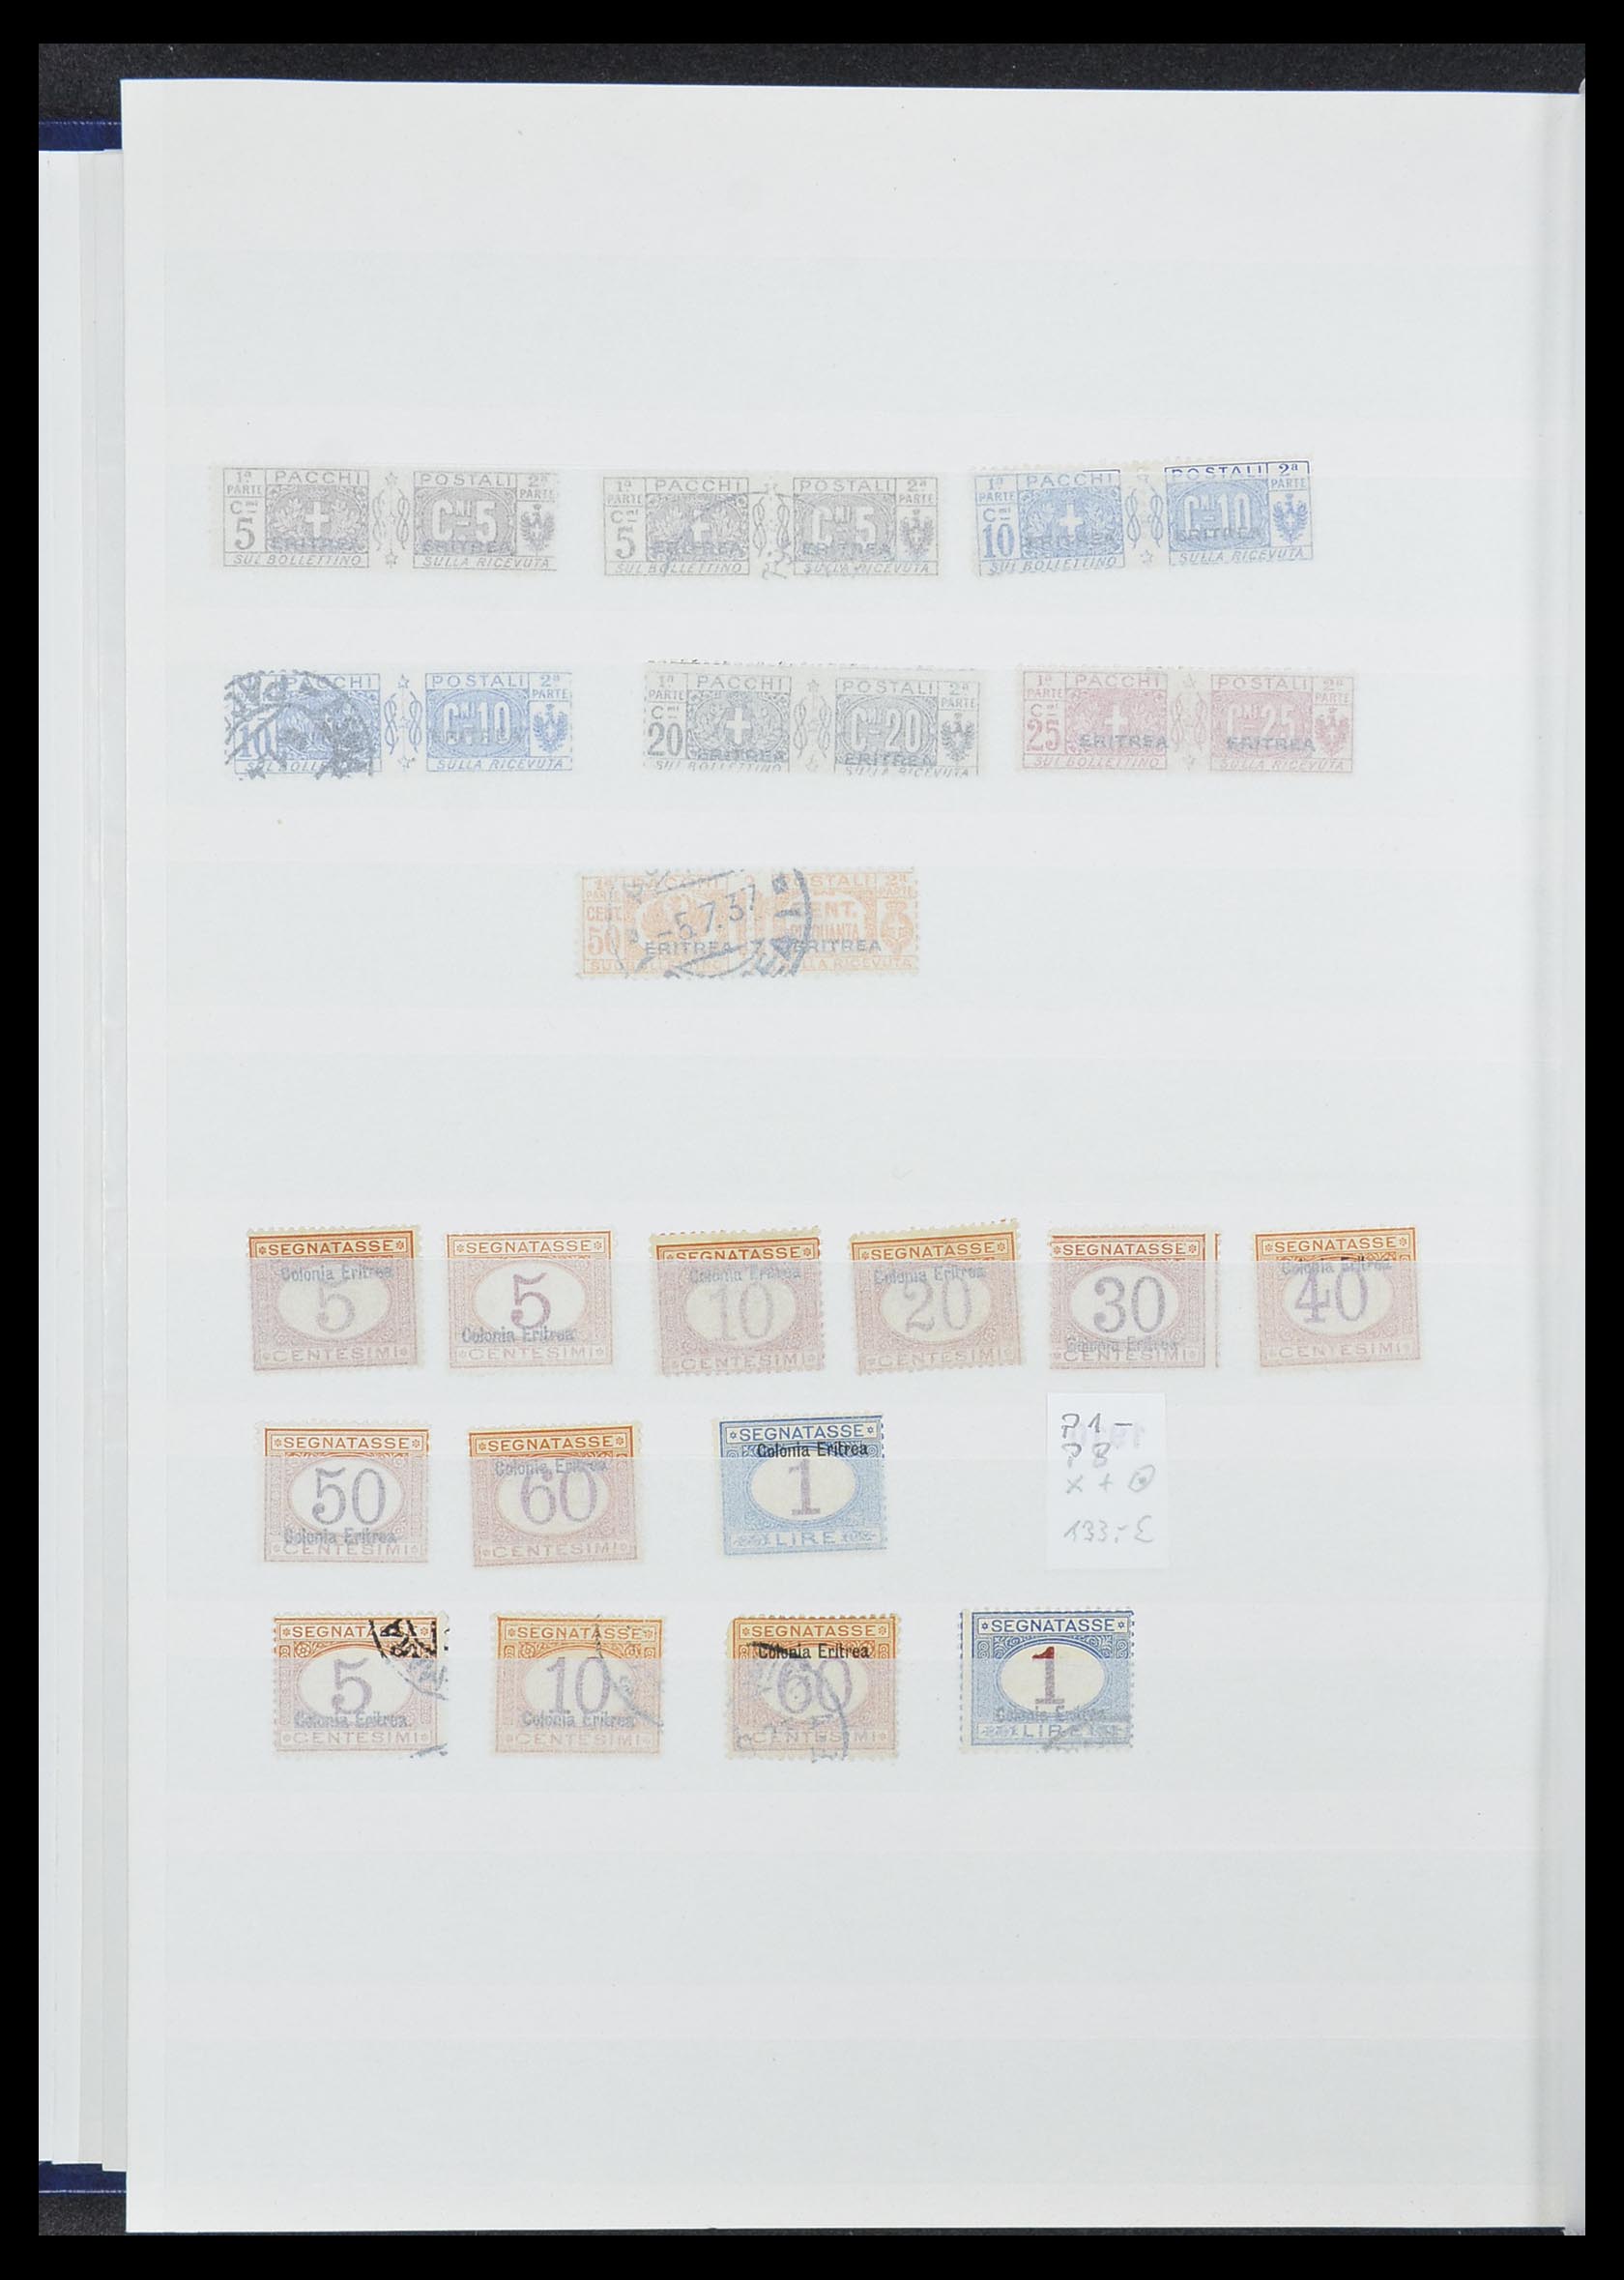 33412 029 - Stamp collection 33412 Italy and colonies 1852-1960.